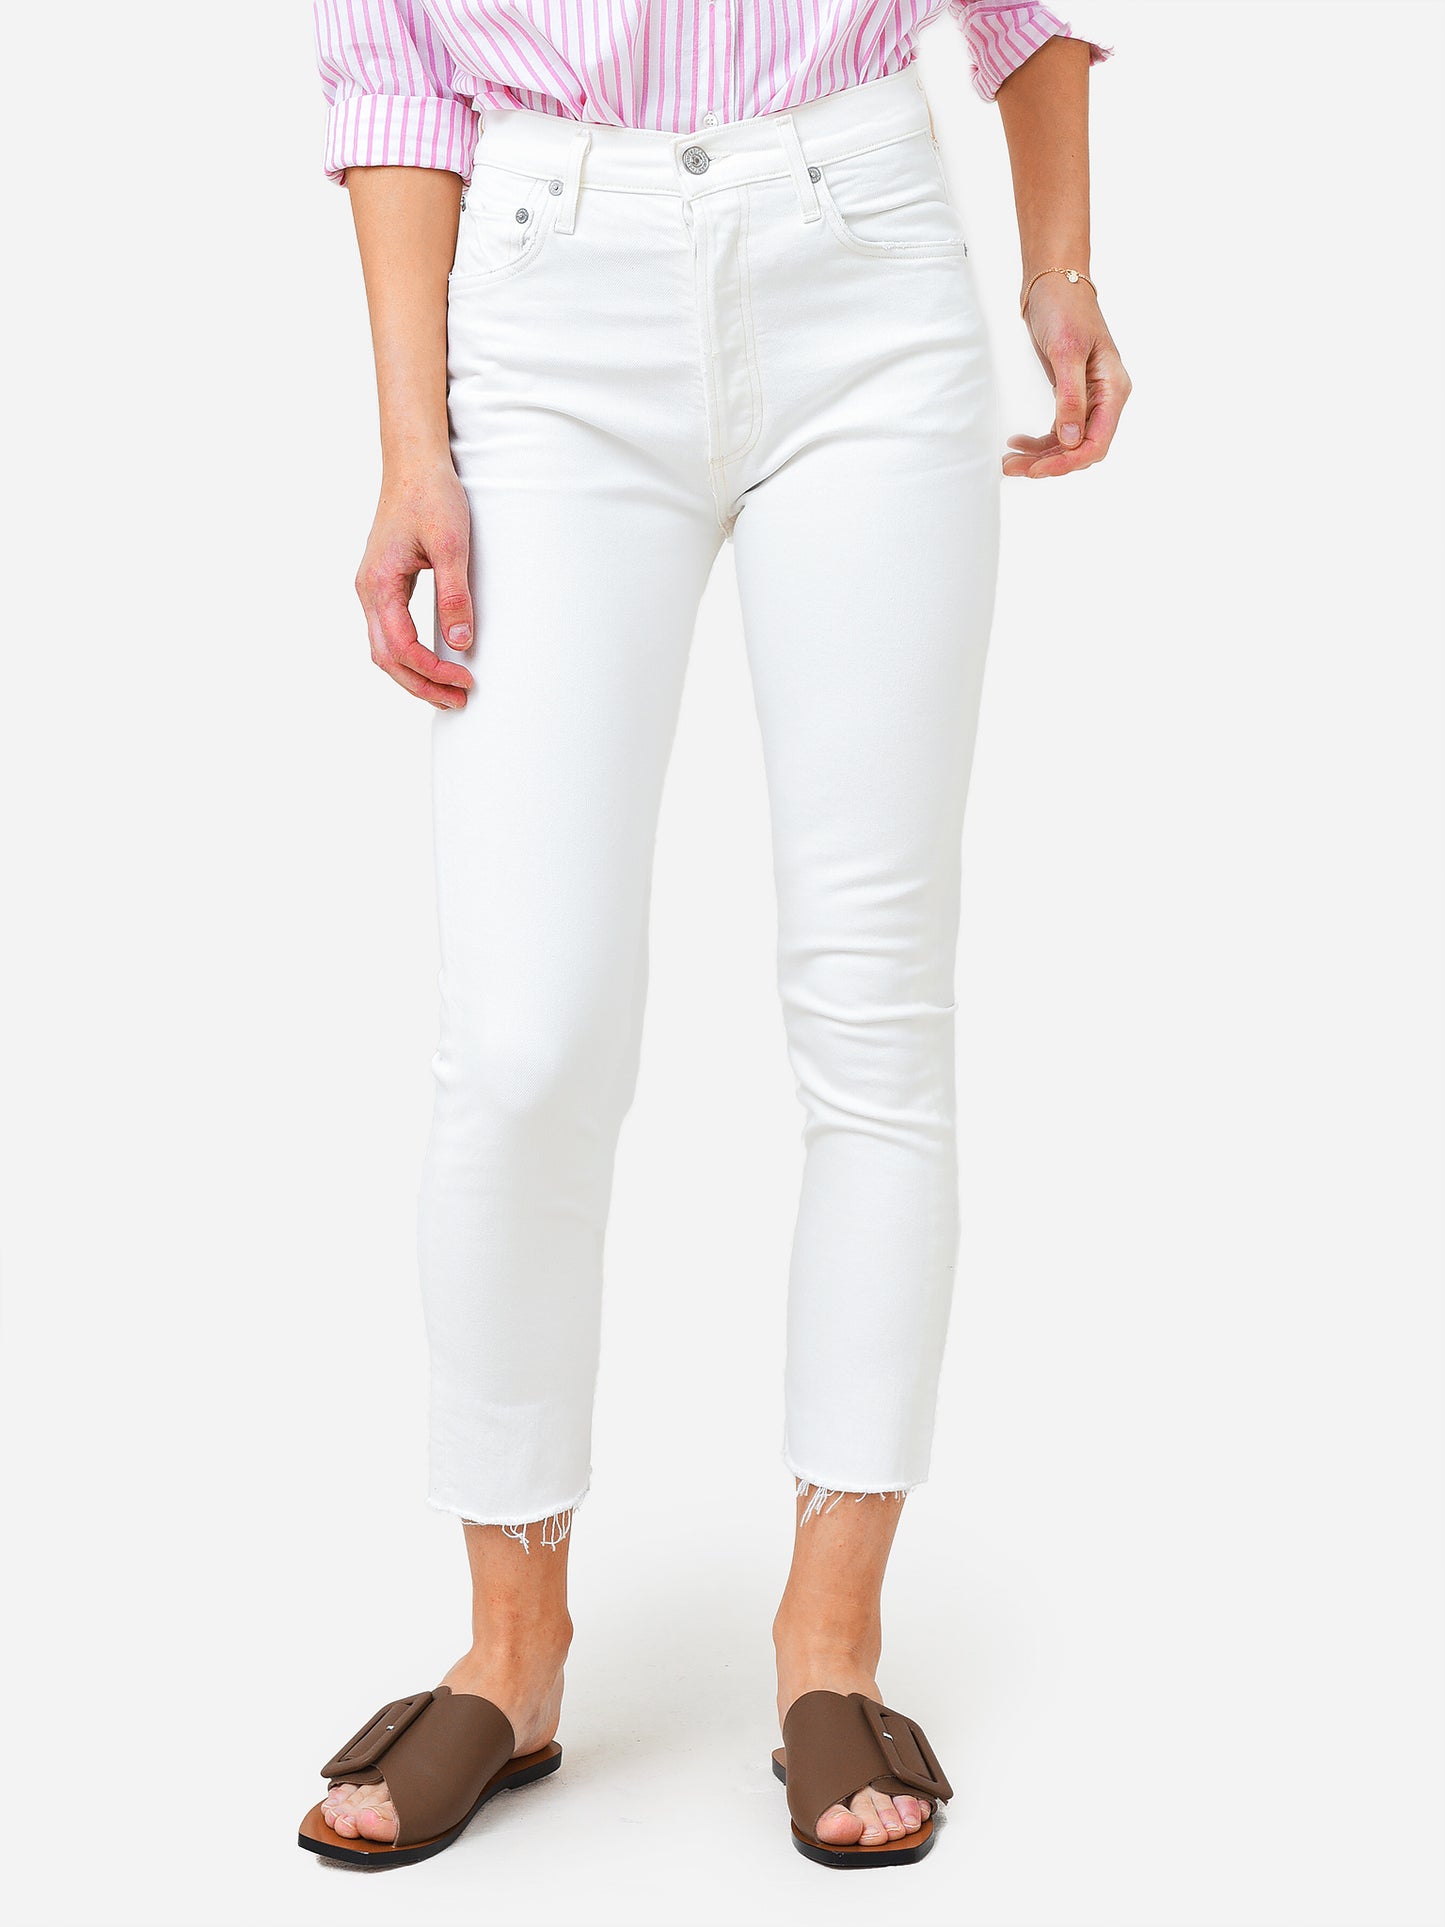 Citizens Of Humanity Women's Charlotte Crop Jean